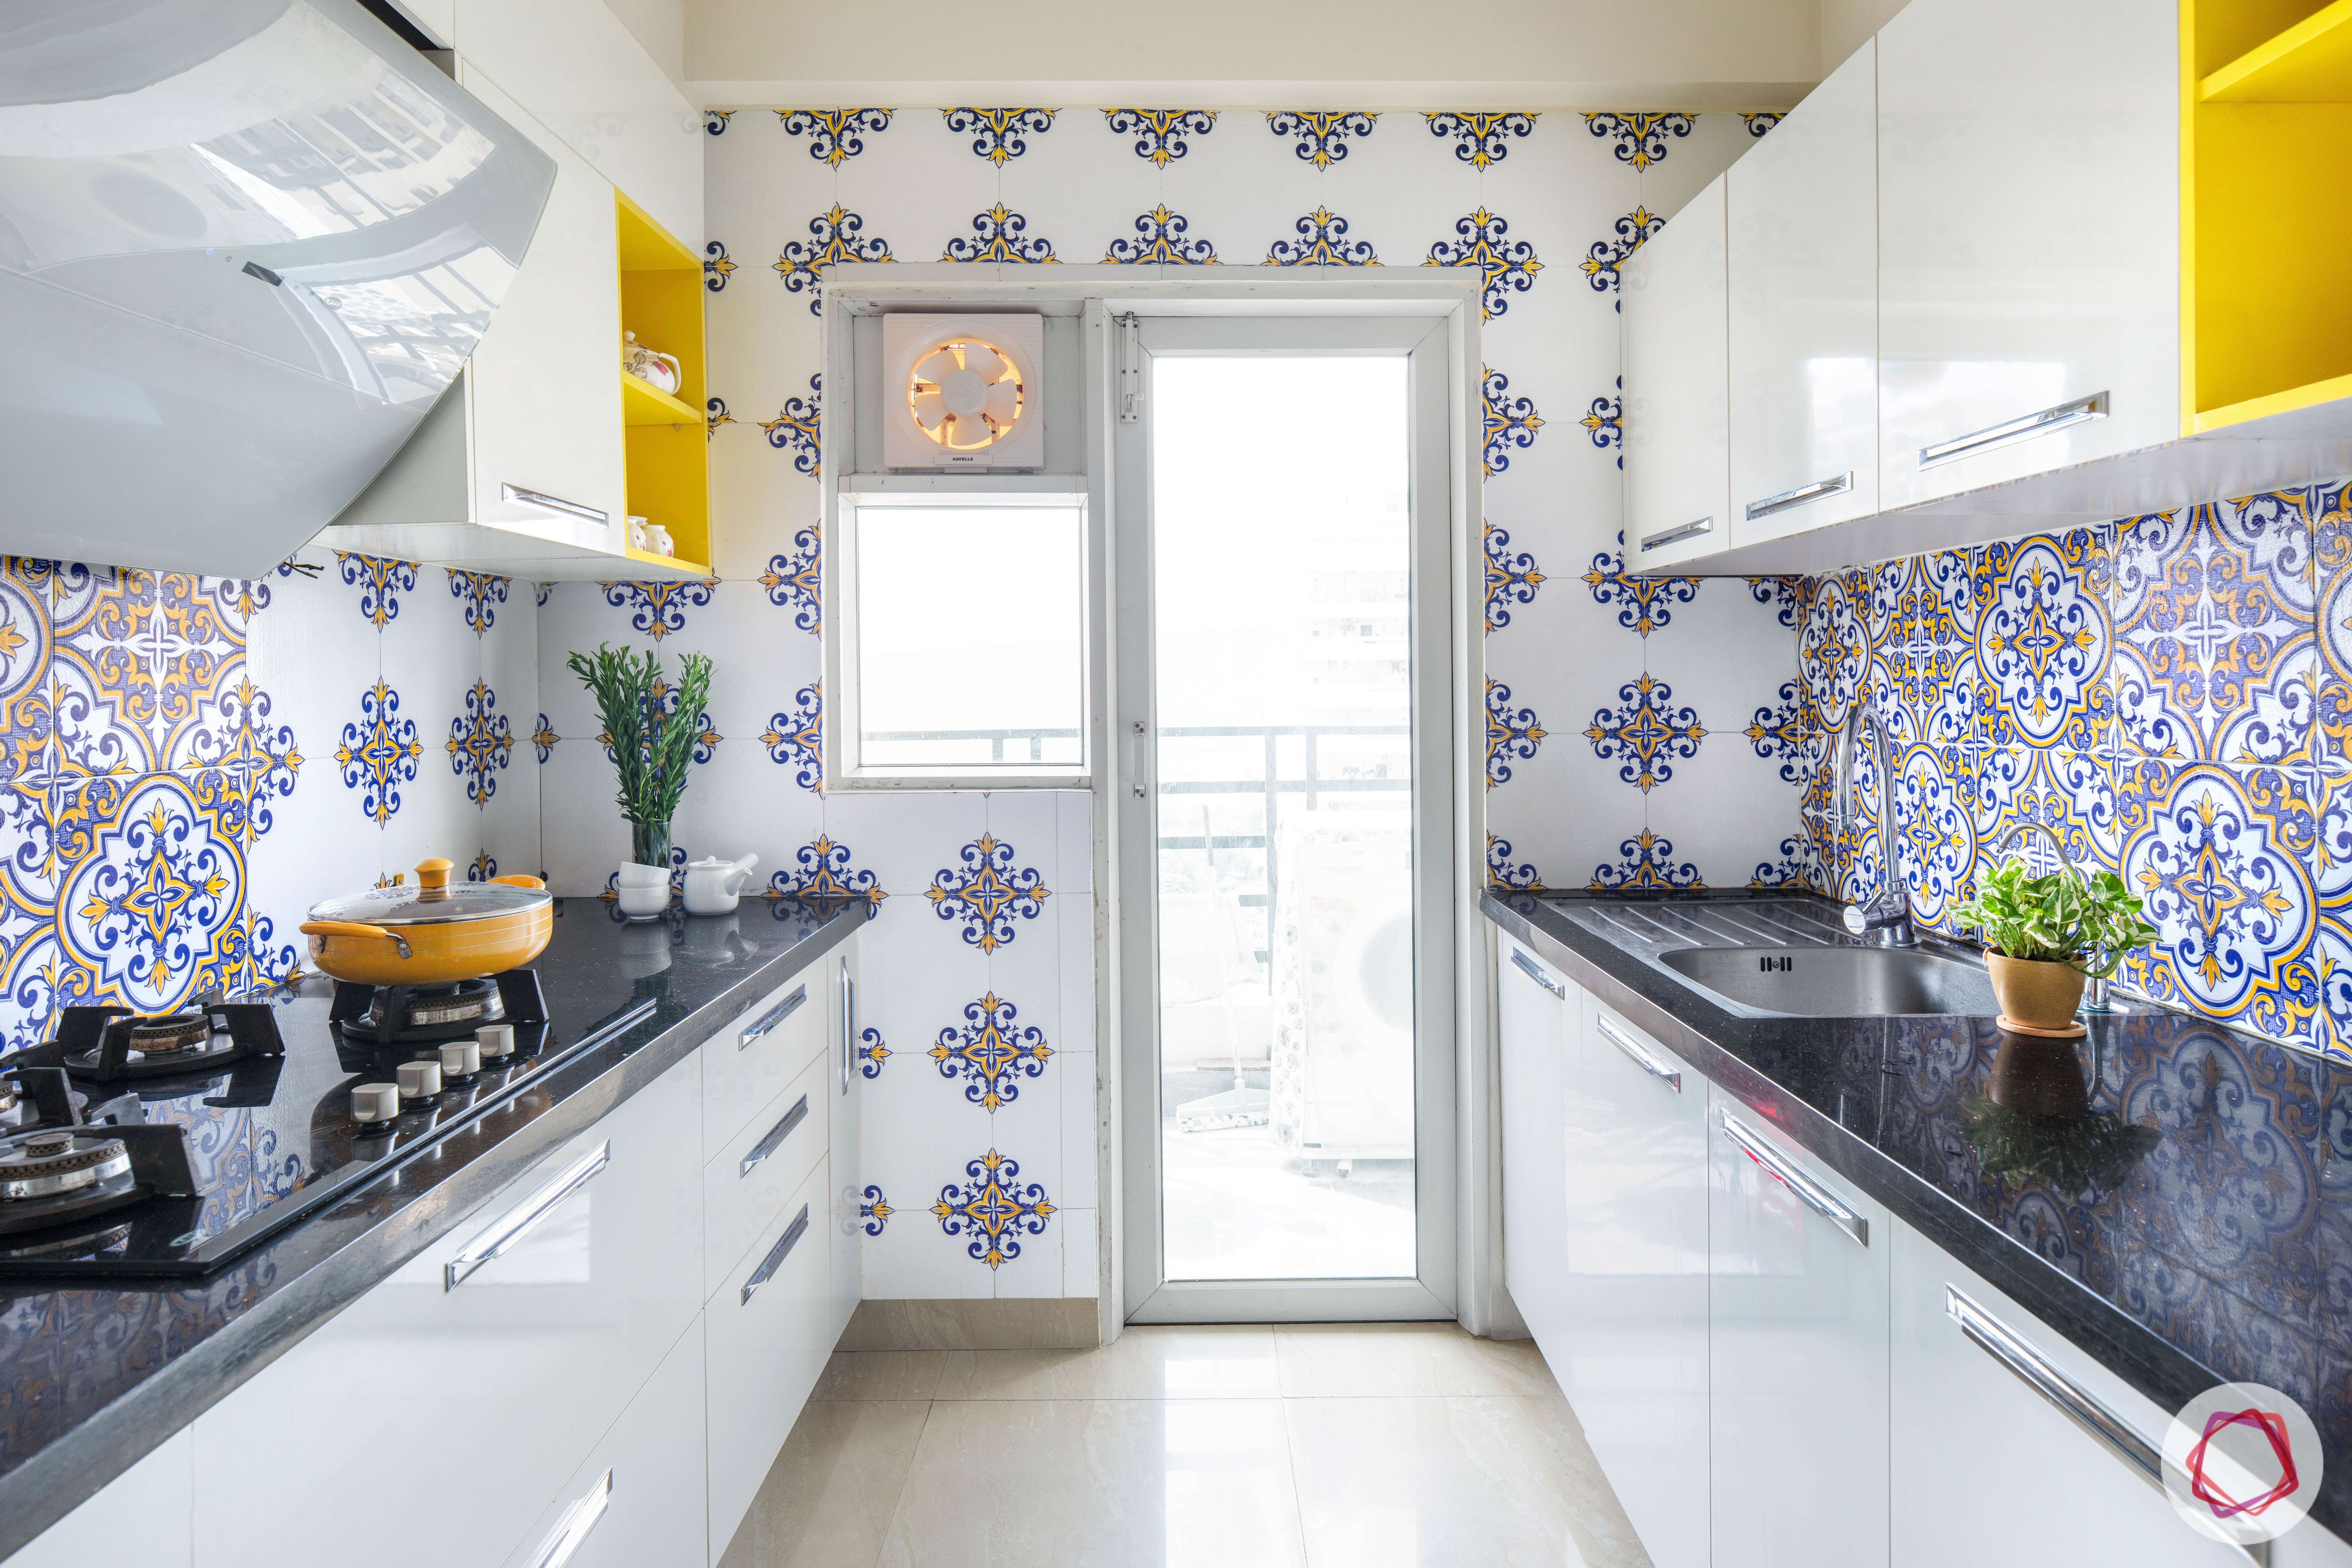 20 Splendid Wall Tiles Design That Can Give a New Look to Your Kitchen